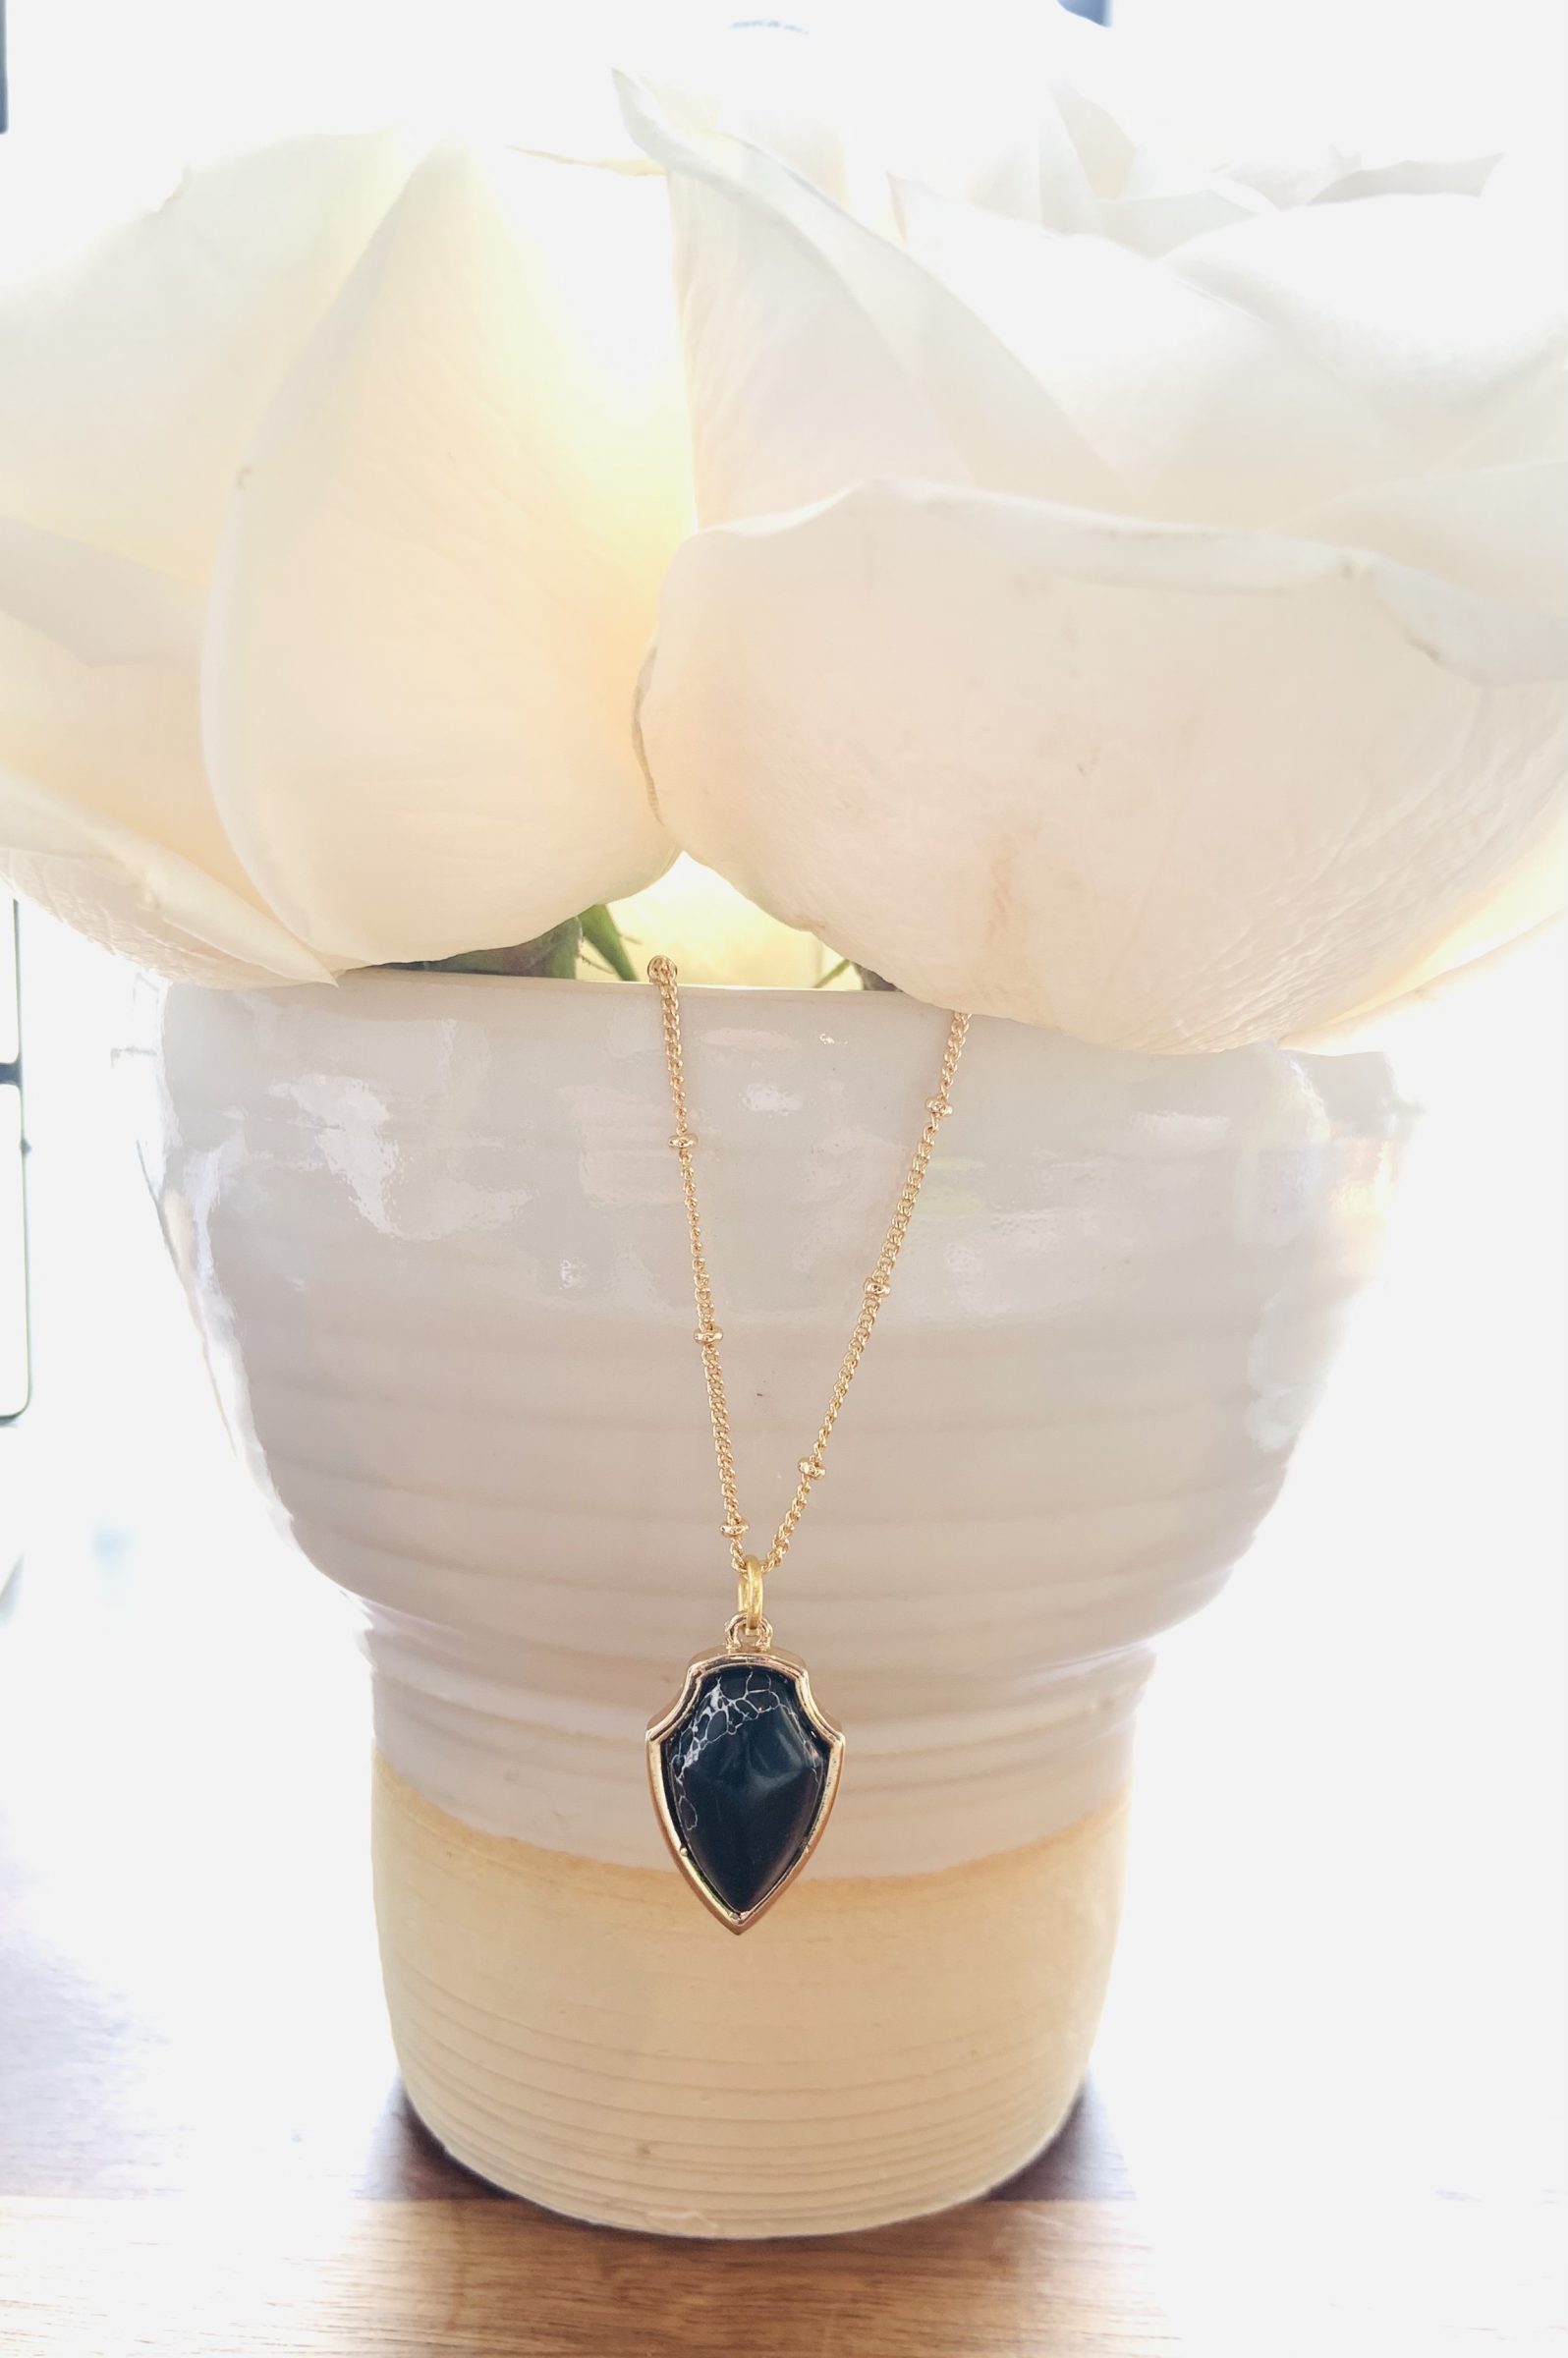 Gold chain necklace with onyx stone by Minneapolis jeweler Intentional Mantra